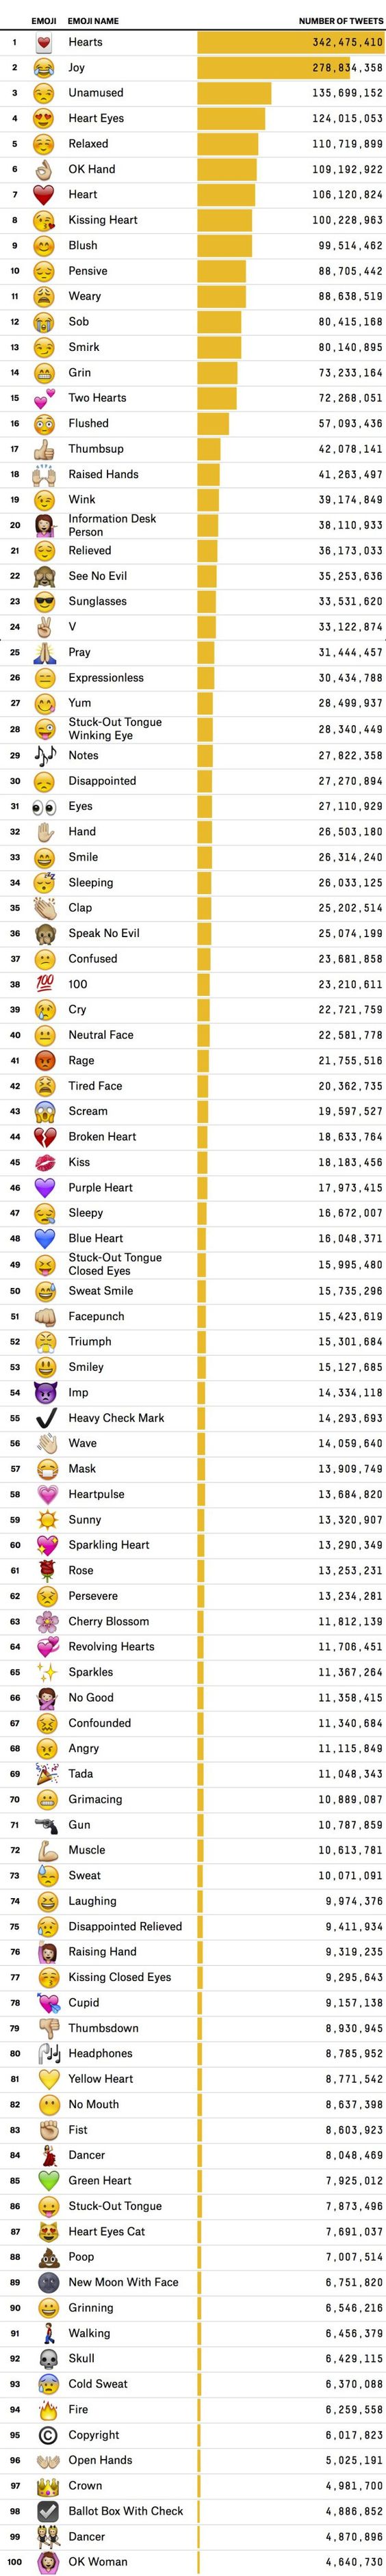 The 100 Most Used #Emoji on #Twitter #Social